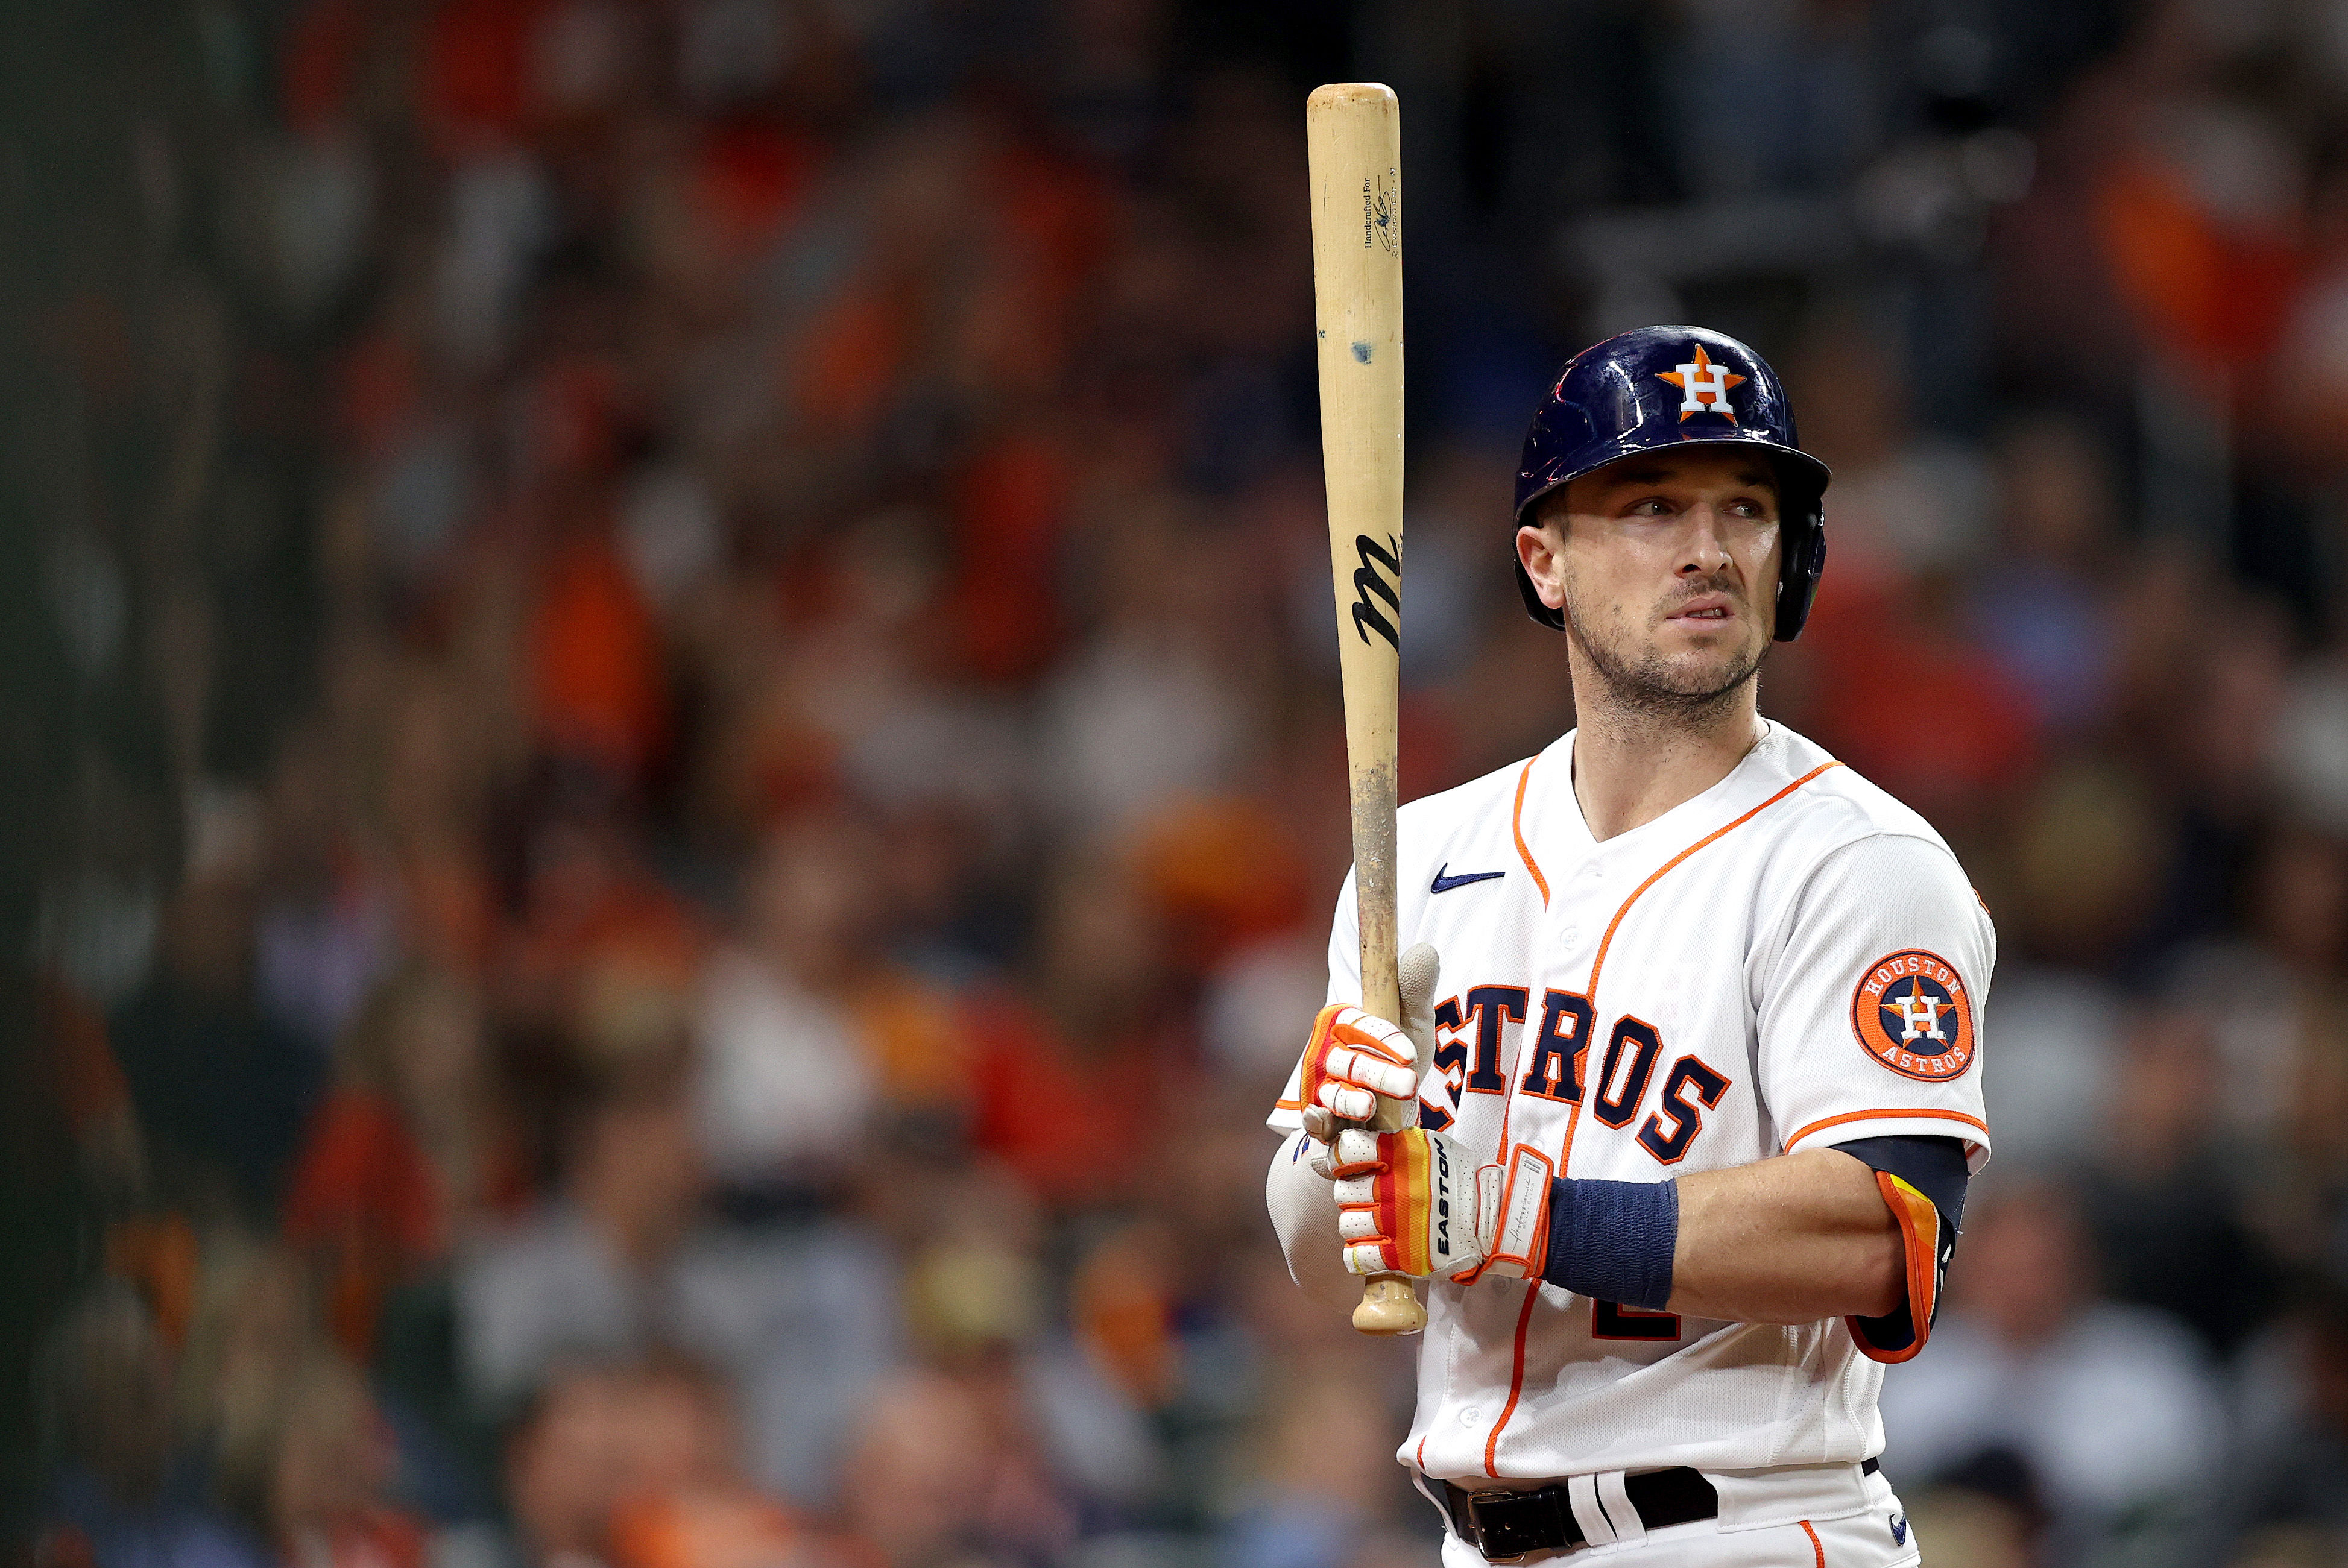 Astros' Alex Bregman stops to help stranded fan who happened to be